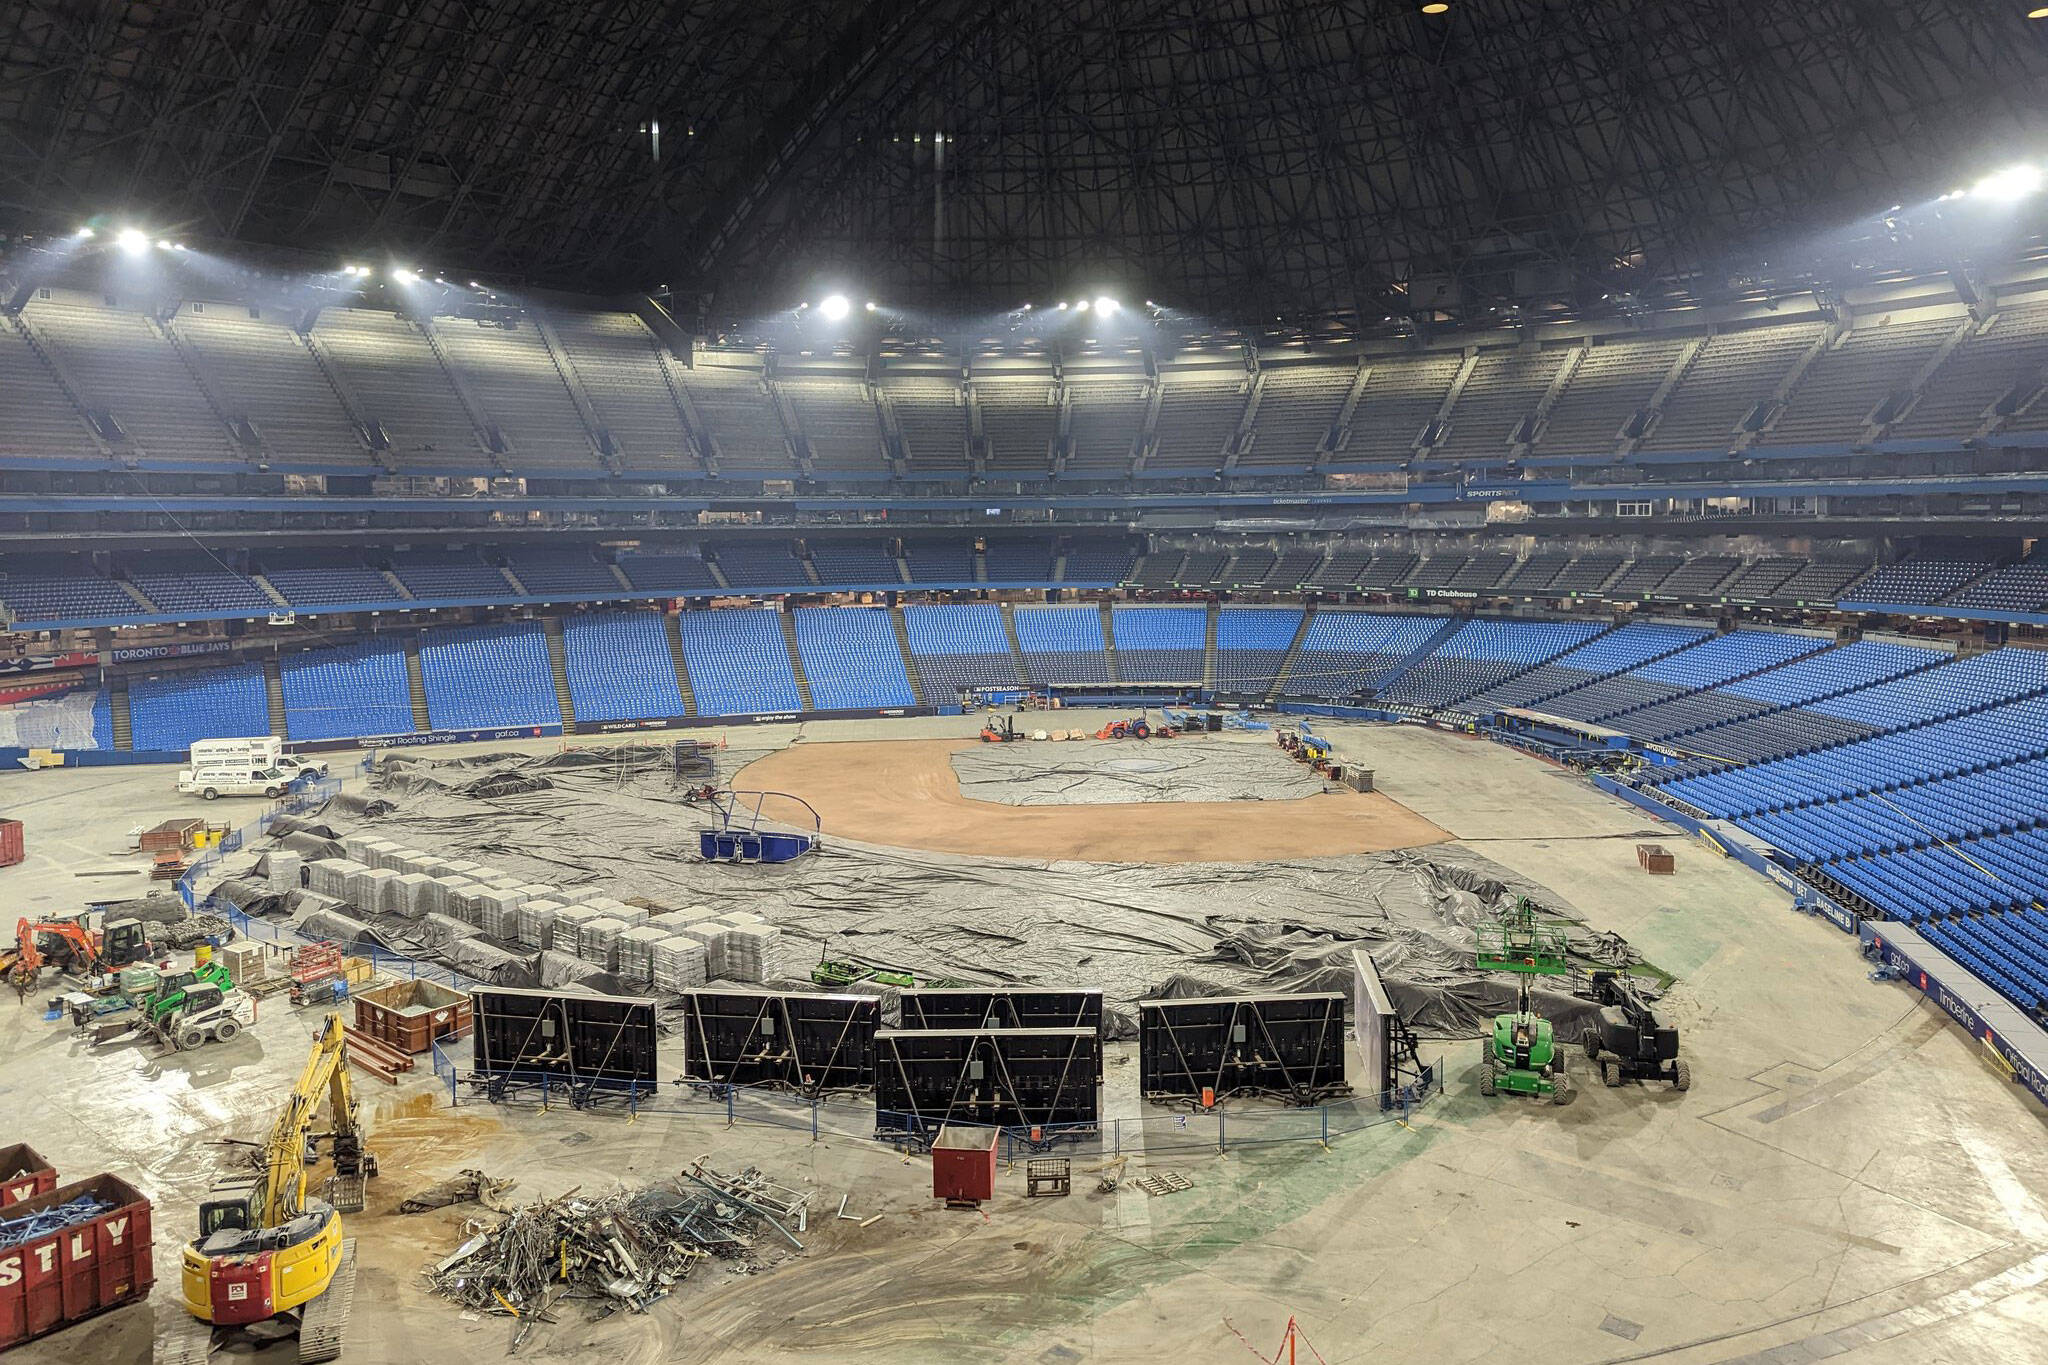 How are the Rogers Centre renos? Here's what fans think of the new